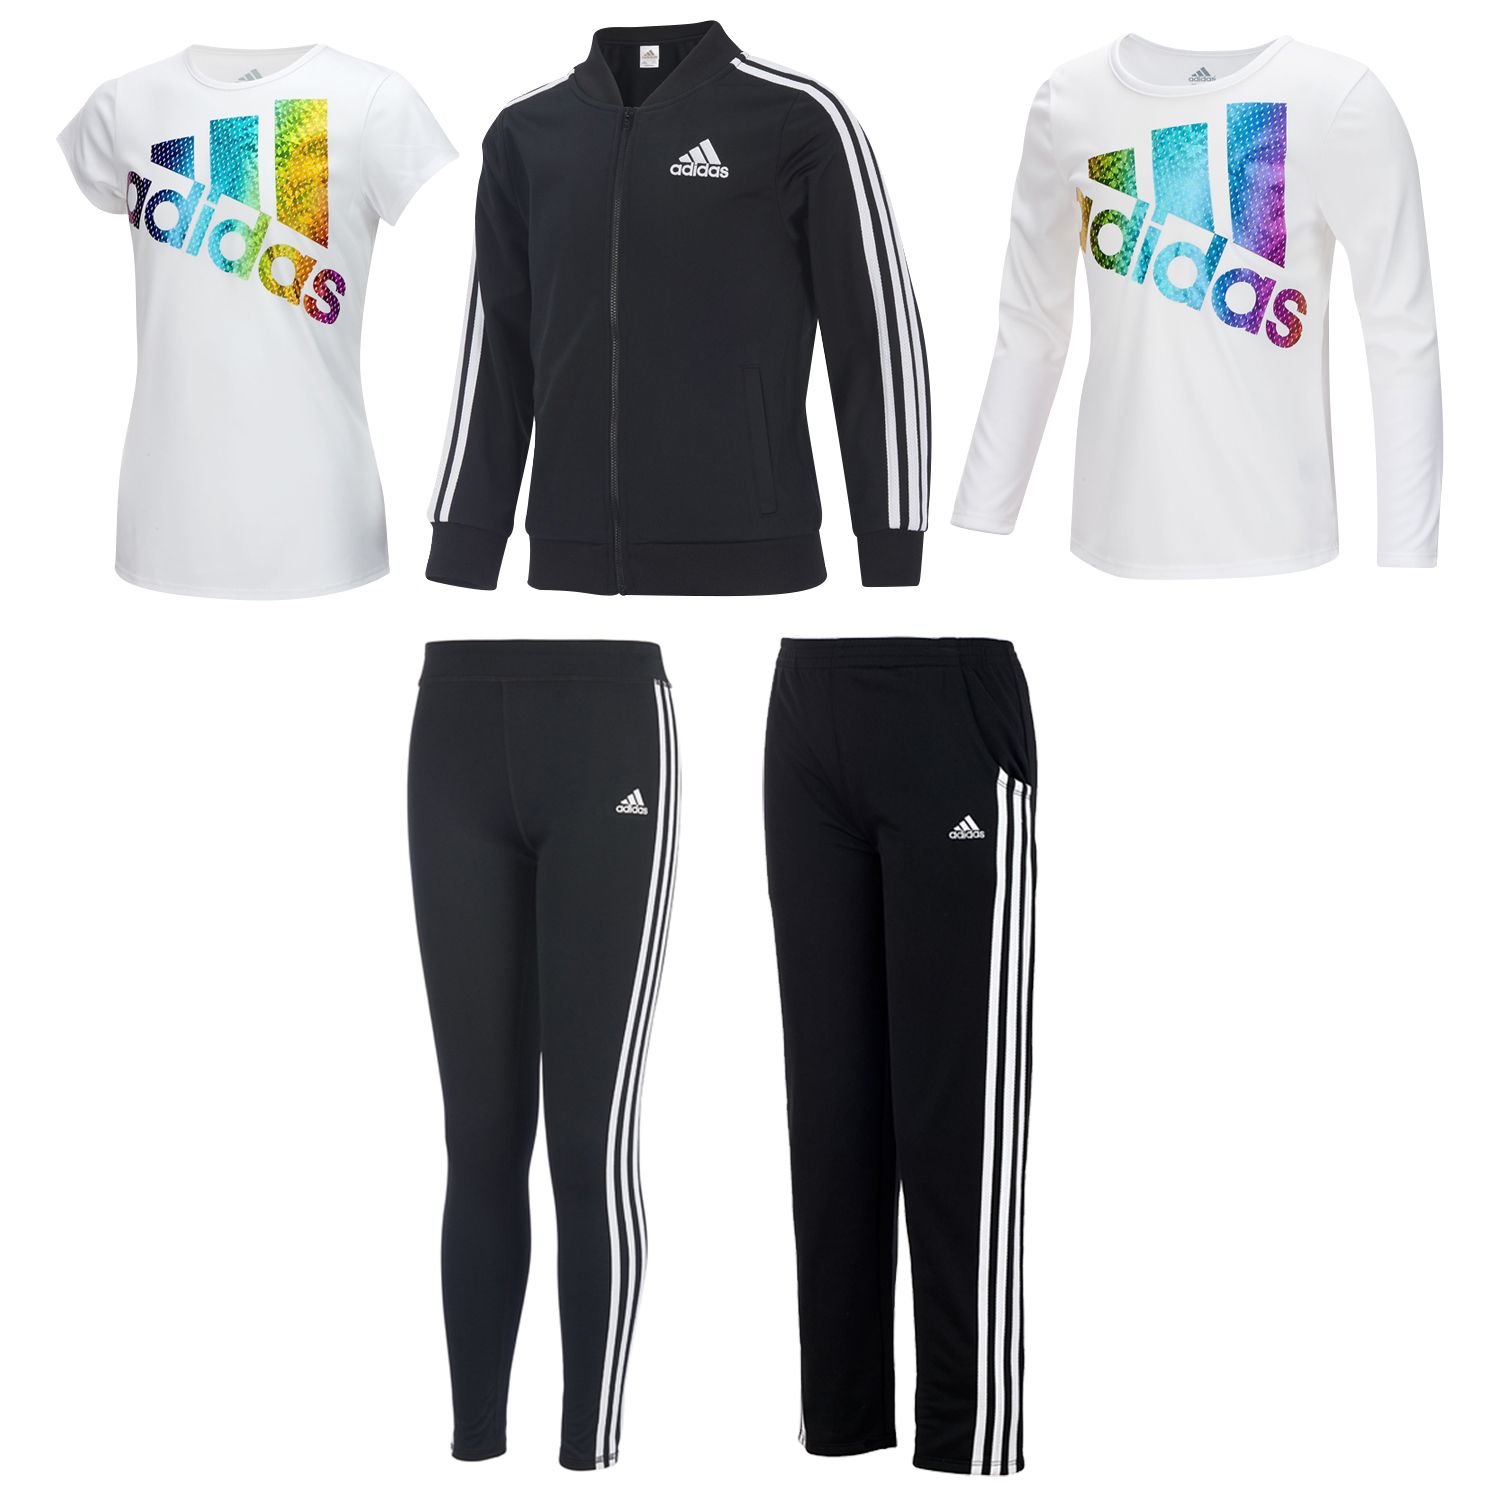 adidas clothes for girls